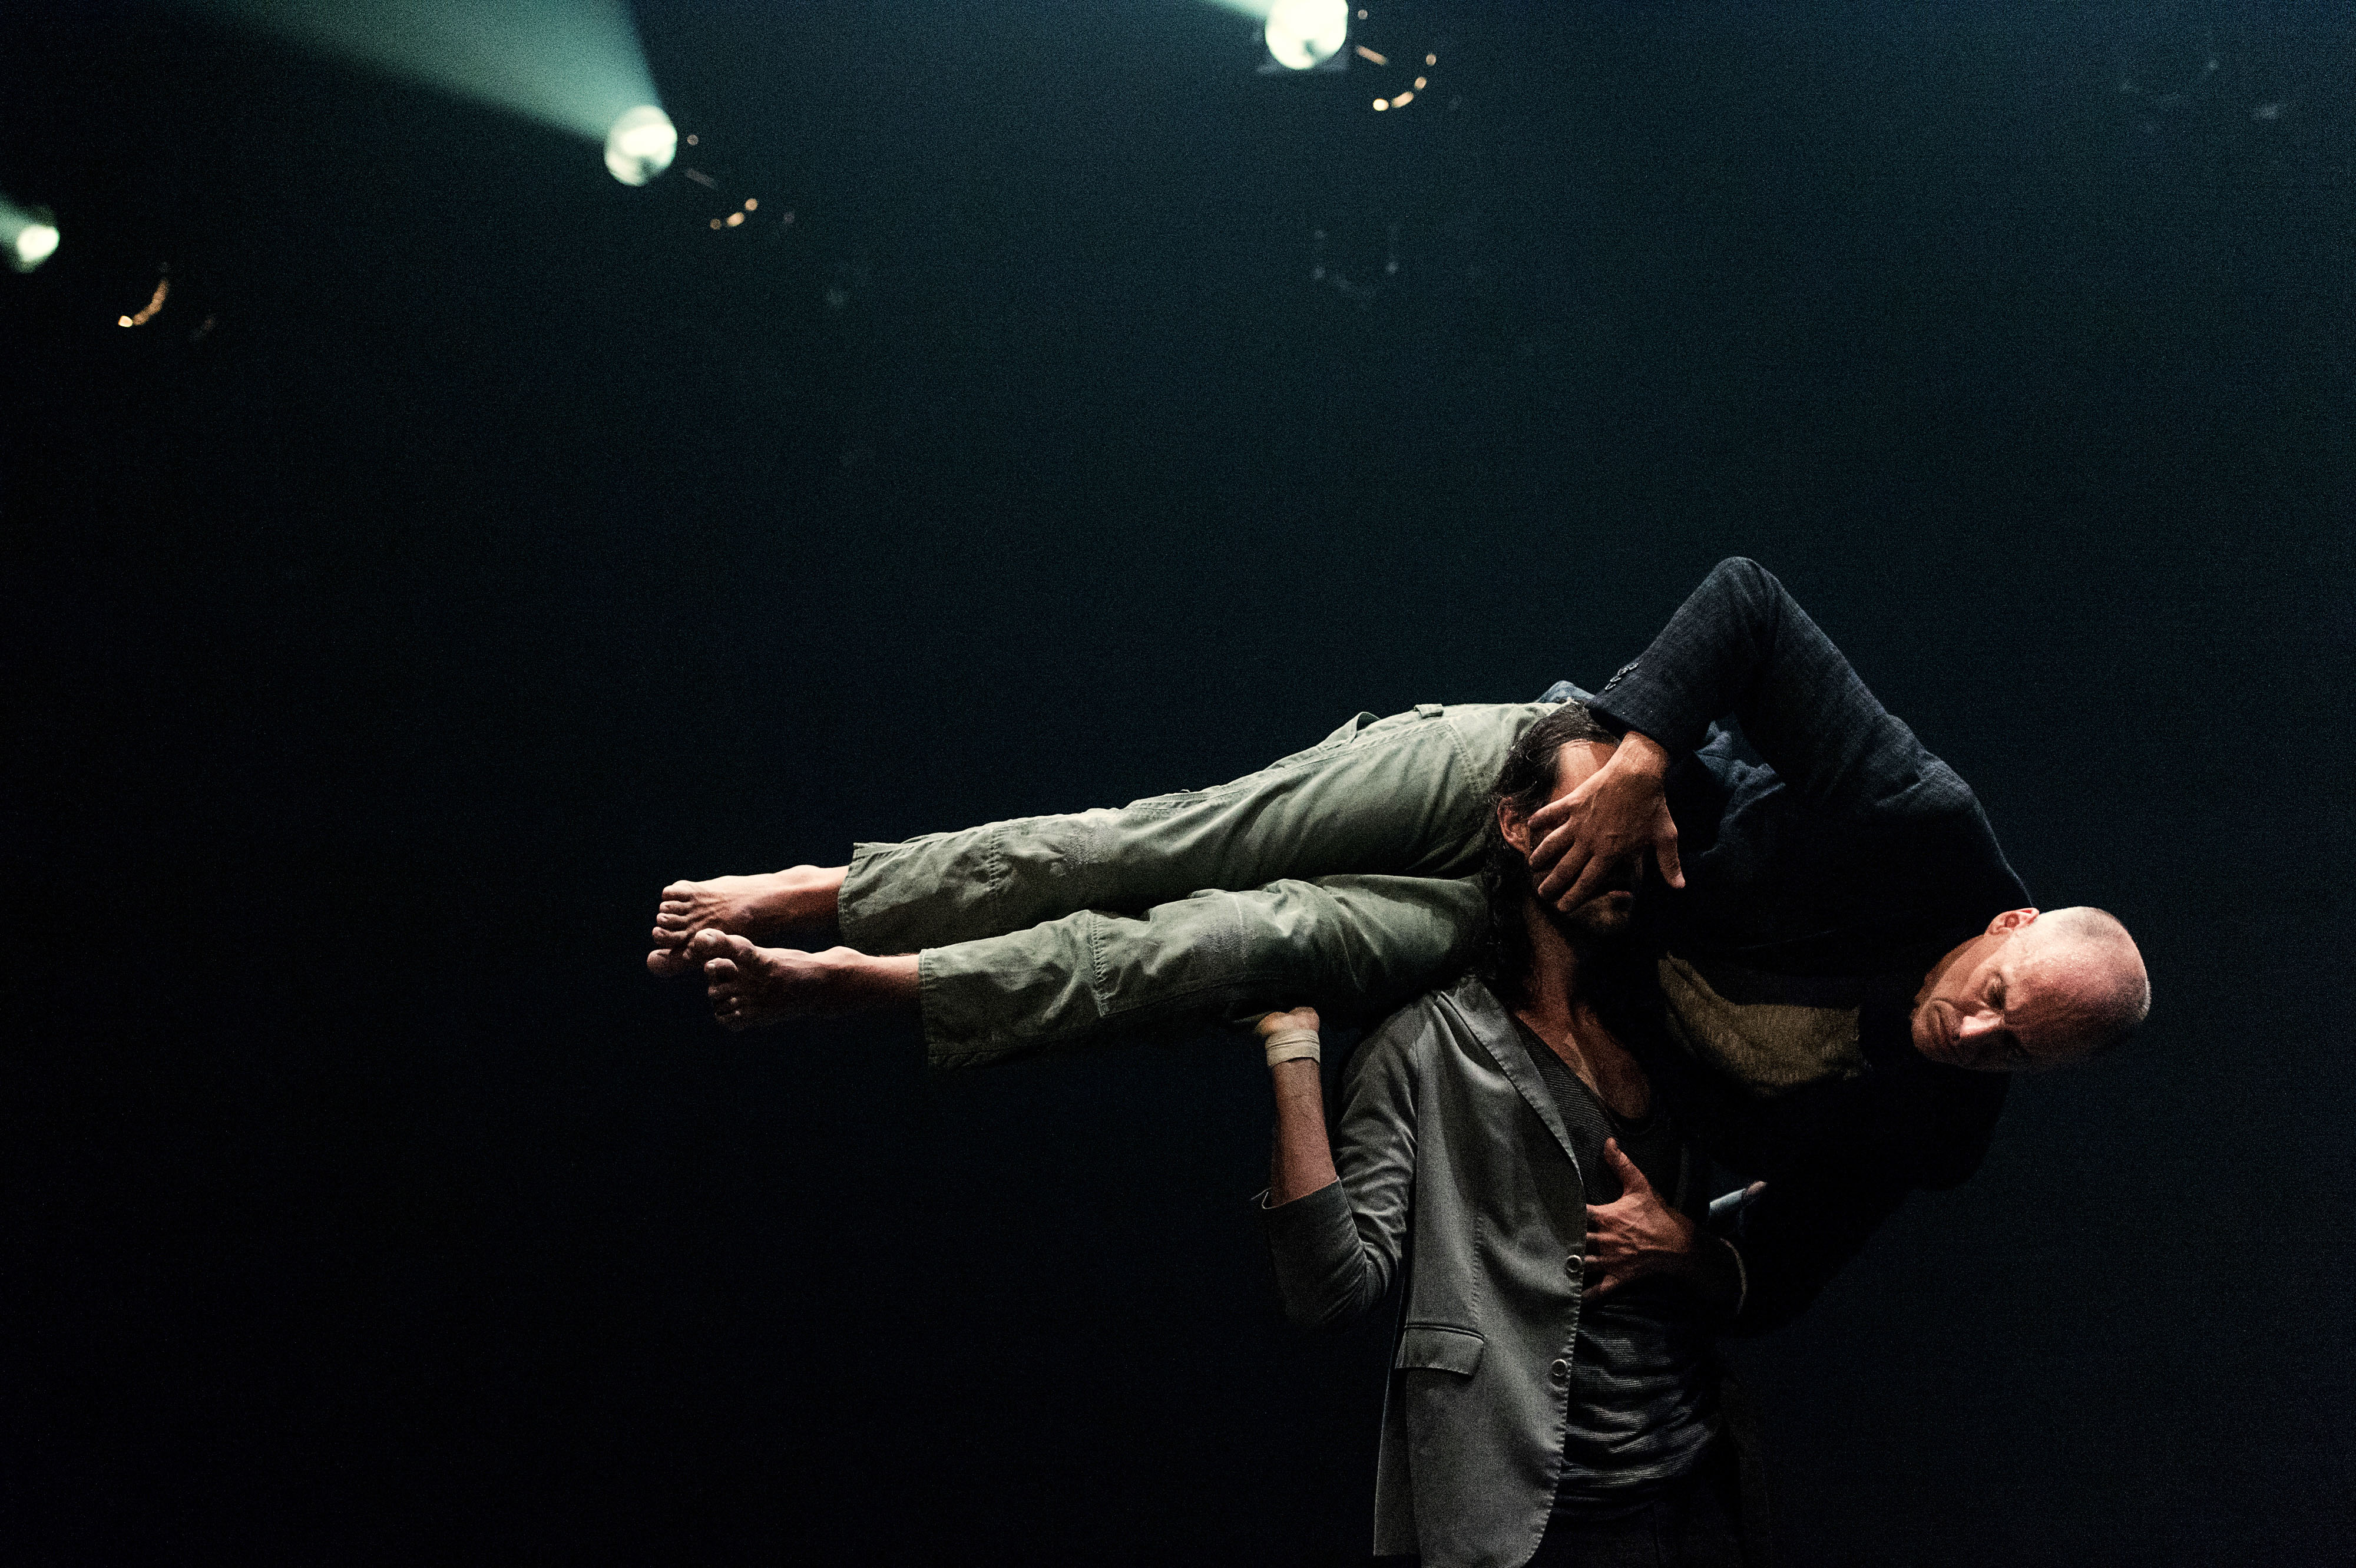 Two men in a contemporary dance piece called Dancers of Parts + Labour_Danse.